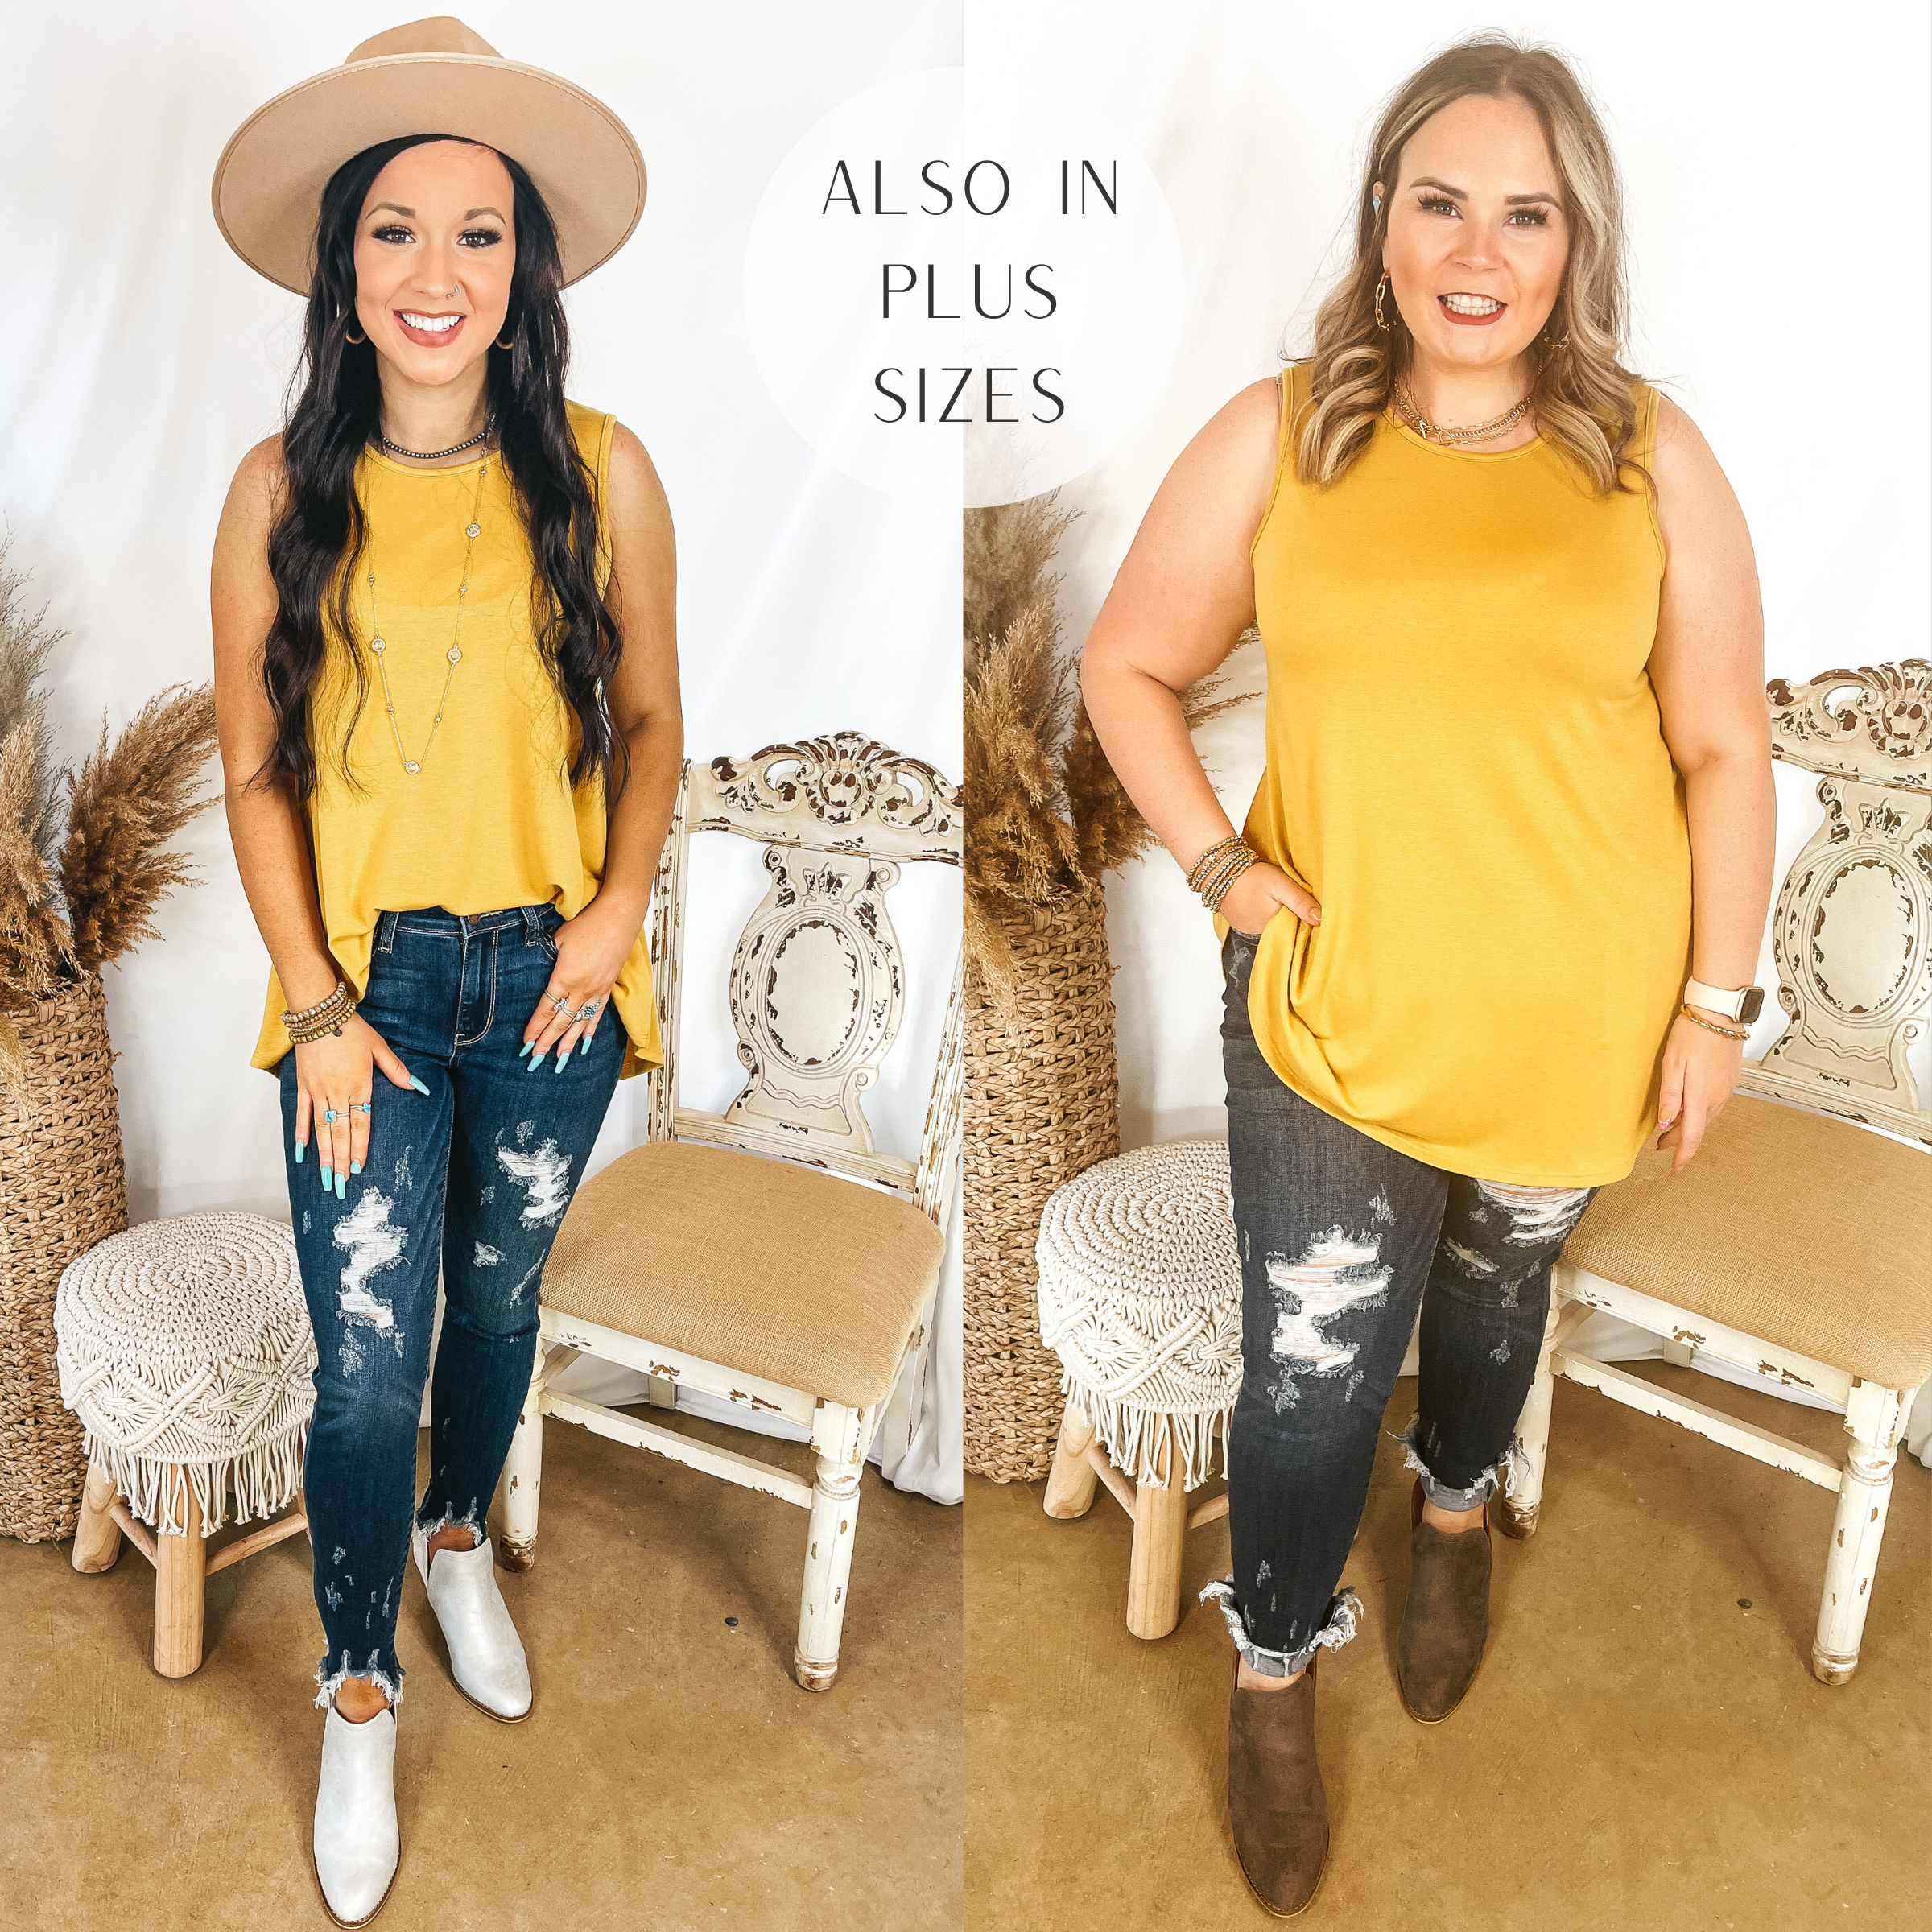 Models are wearing a mustard yellow tank top. Size small model has it paired with distressed dark wash jeans, white booties, and a tan hat. Size large model has it paired with distressed skinny jeans, brown booties, and gold jewelry.